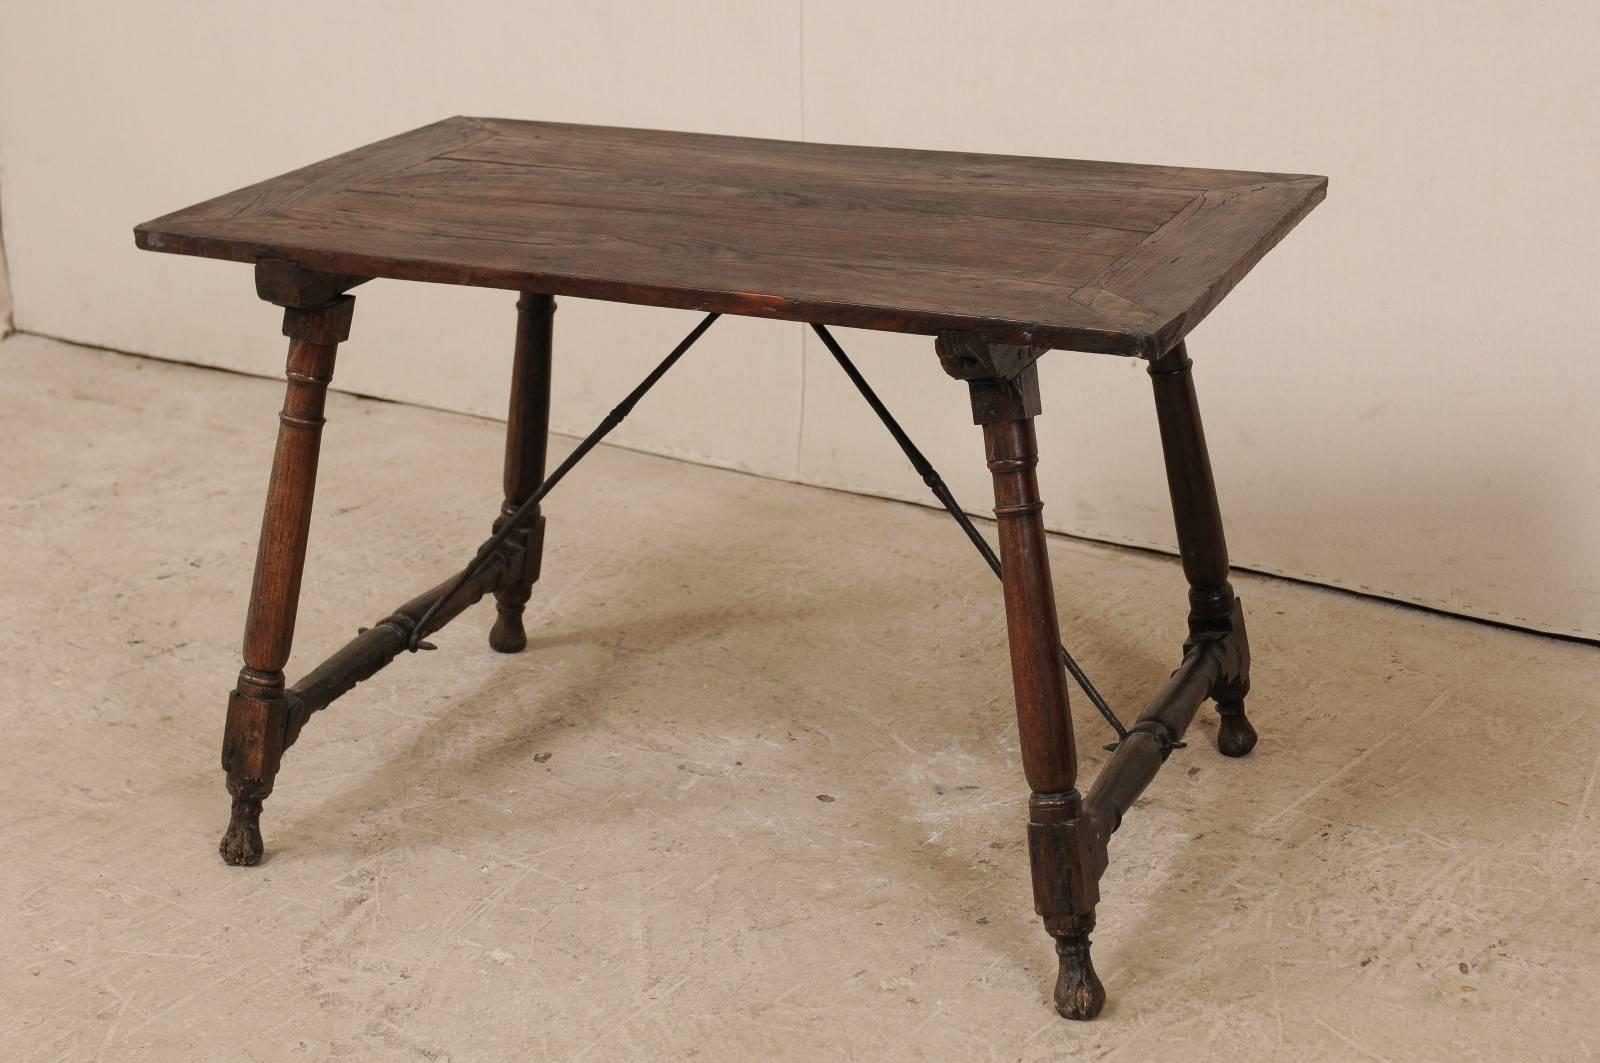 Antique Italian Wood & Iron Stretchered Table (or Great Desk!) Late 18th Century 1